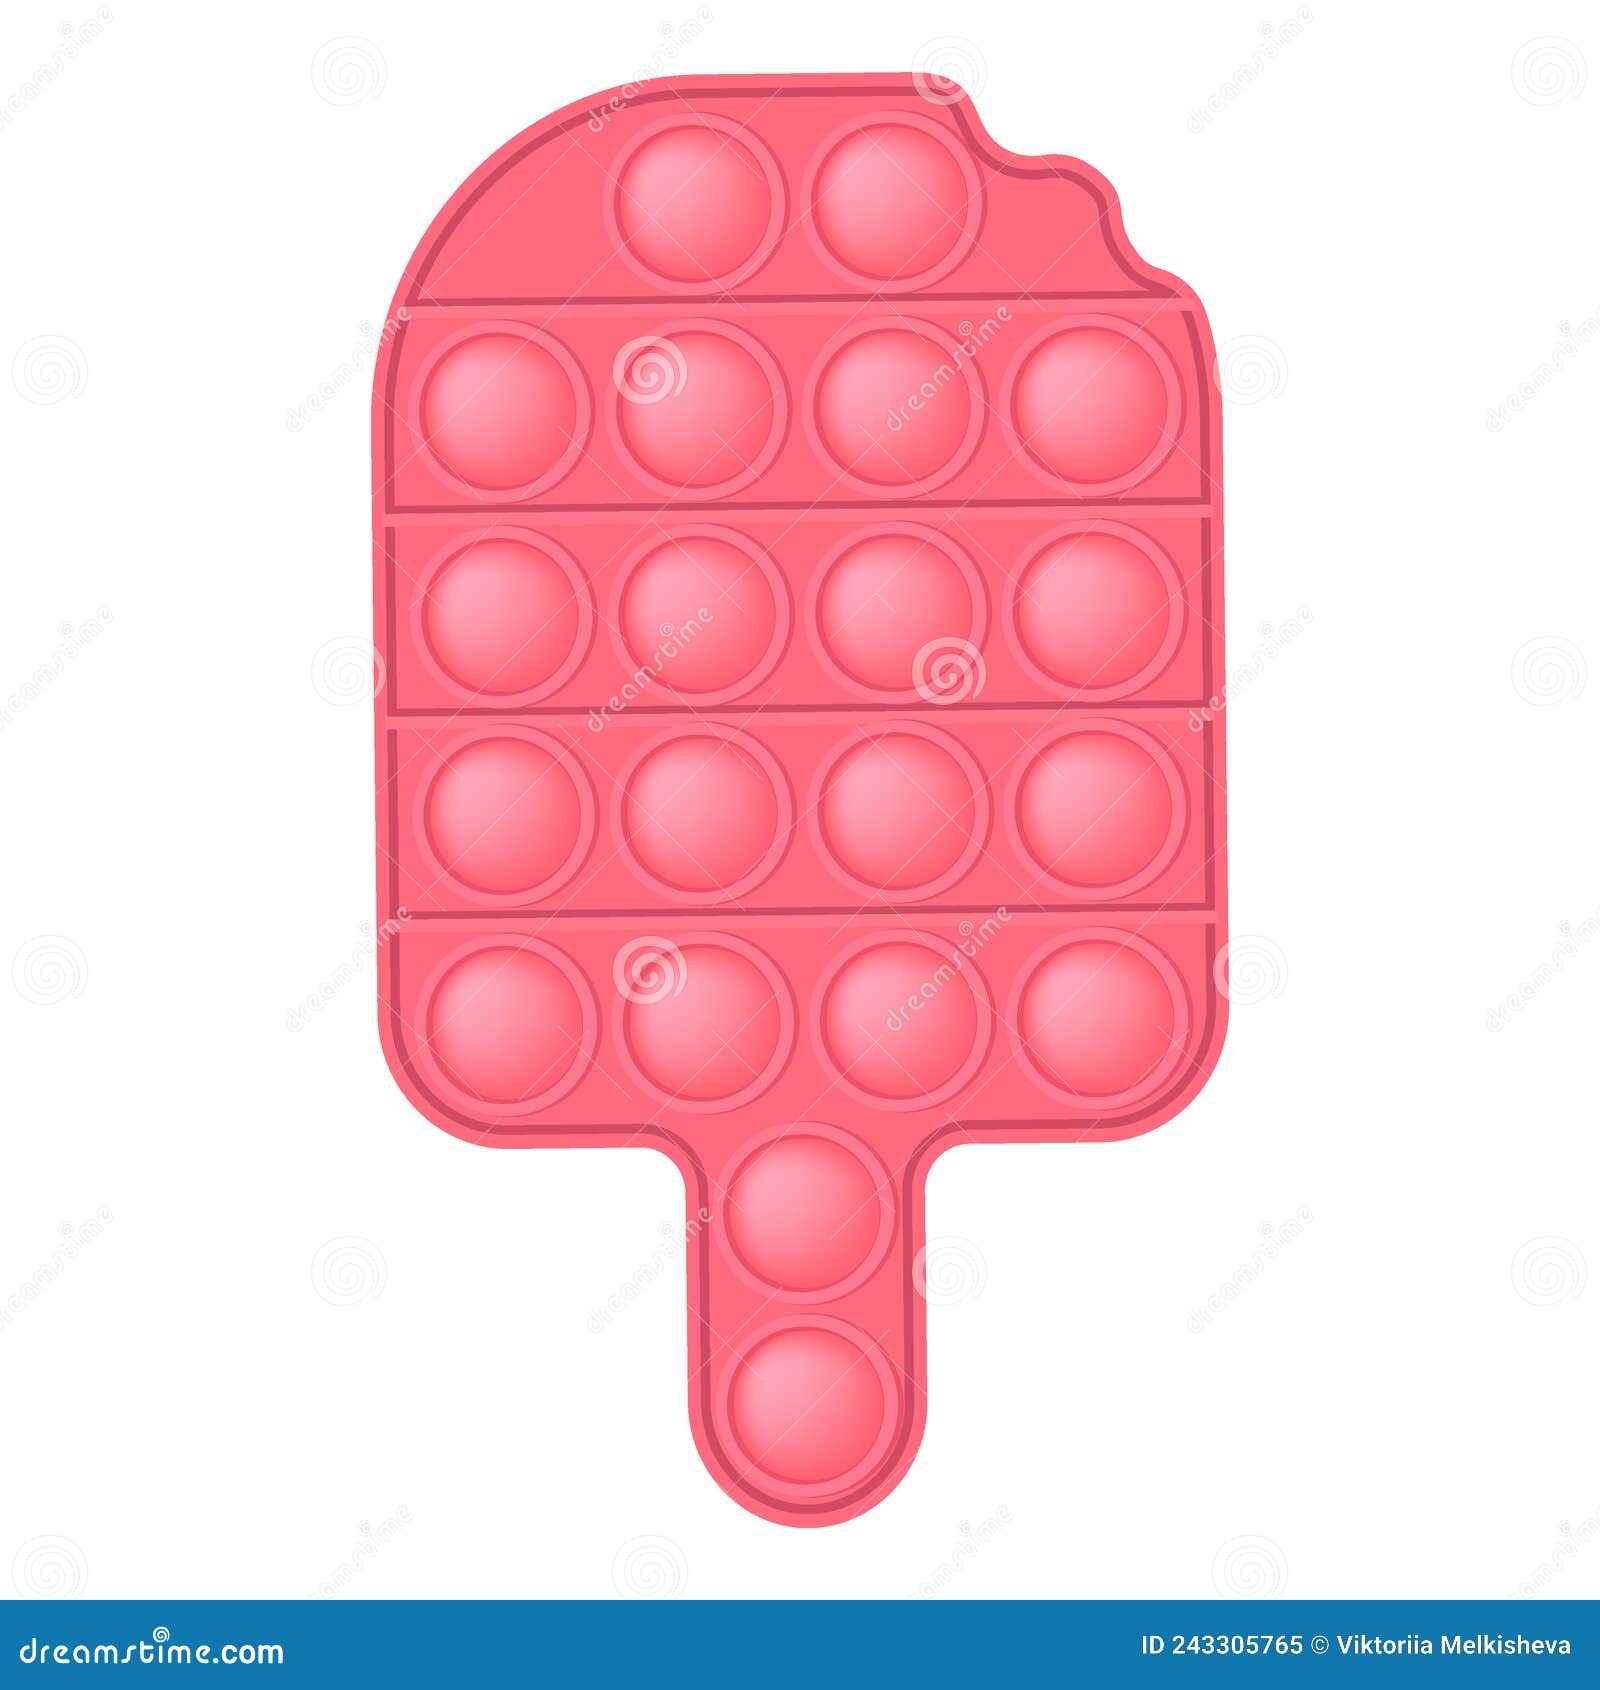 https://thumbs.dreamstime.com/z/pop-coral-pink-ice-cream-valentines-day-as-fashionable-silicon-fidget-toy-addictive-anti-stress-cute-pastel-colors-243305765.jpg